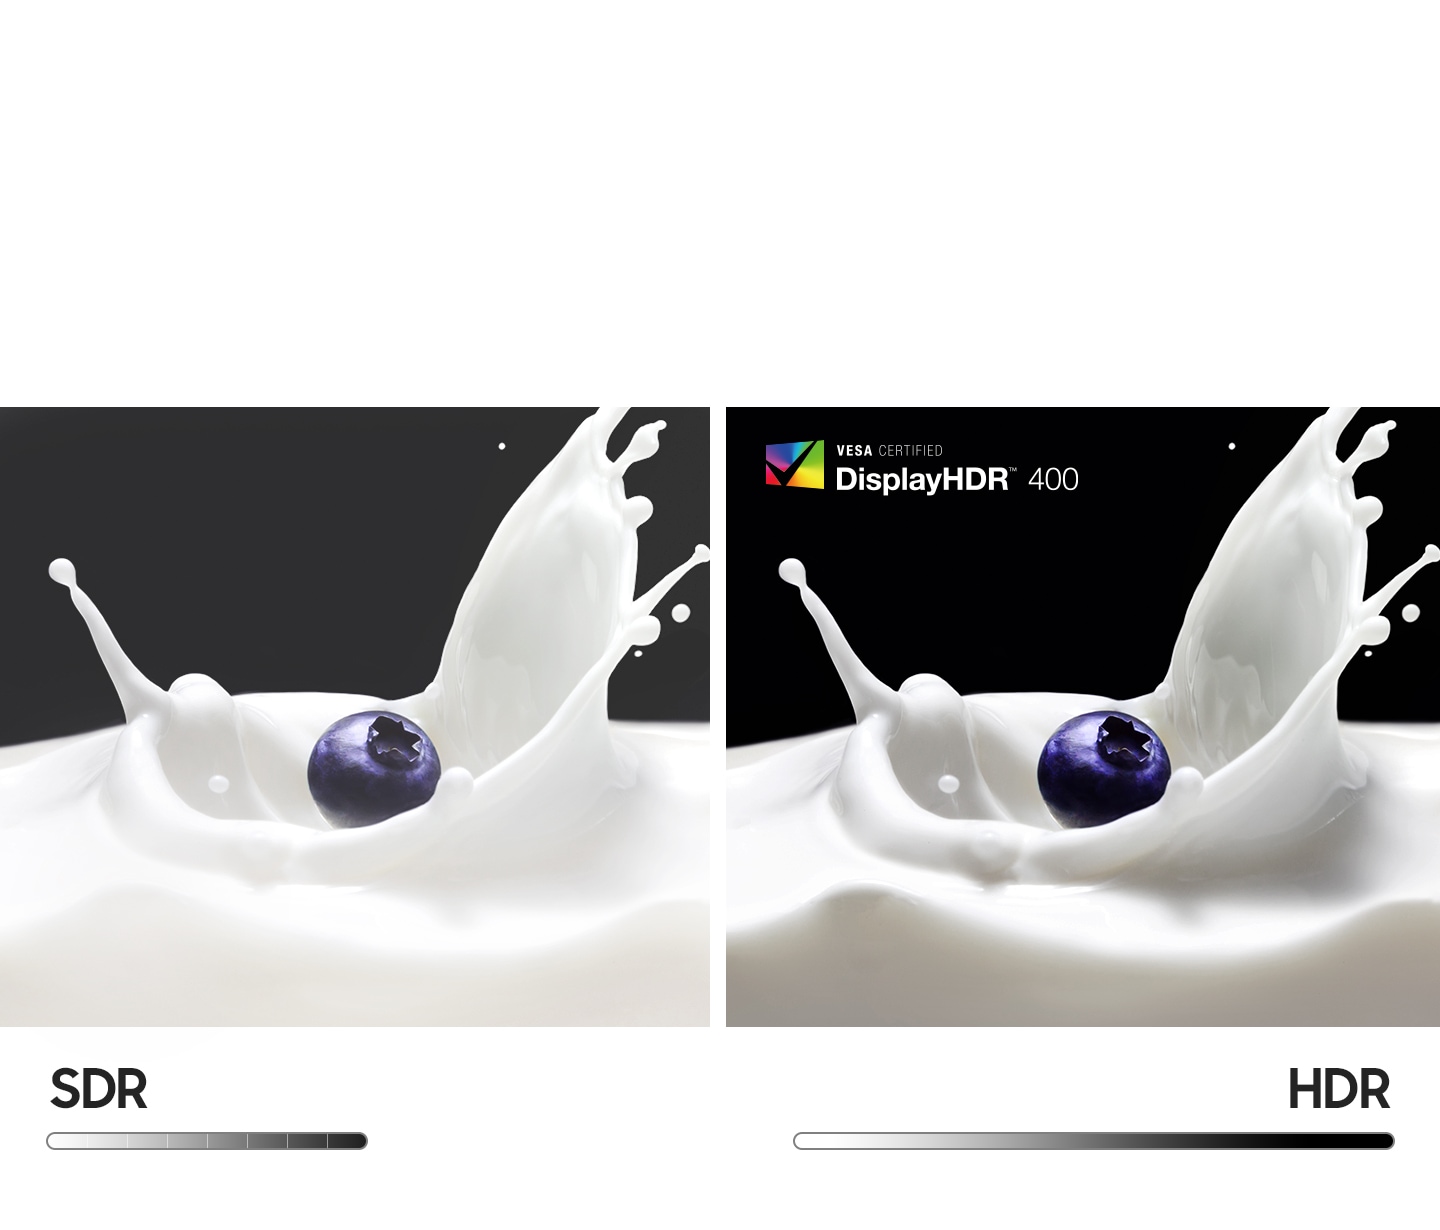 Two identical blueberries side-by-side are shown landing in milk and causing a splash of liquid. The blueberry on the left is demonstrating SDR, while the blueberry on the right is demonstrating HDR, overlaid with the logo 'VESA Certified DisplayHDR 600'. Compared to SDR part, HDR shows much deeper dark colors and more vivid bright colors. Below are located black-and-white bars, which are longer and more sophisticated for HDR compared to SDR.